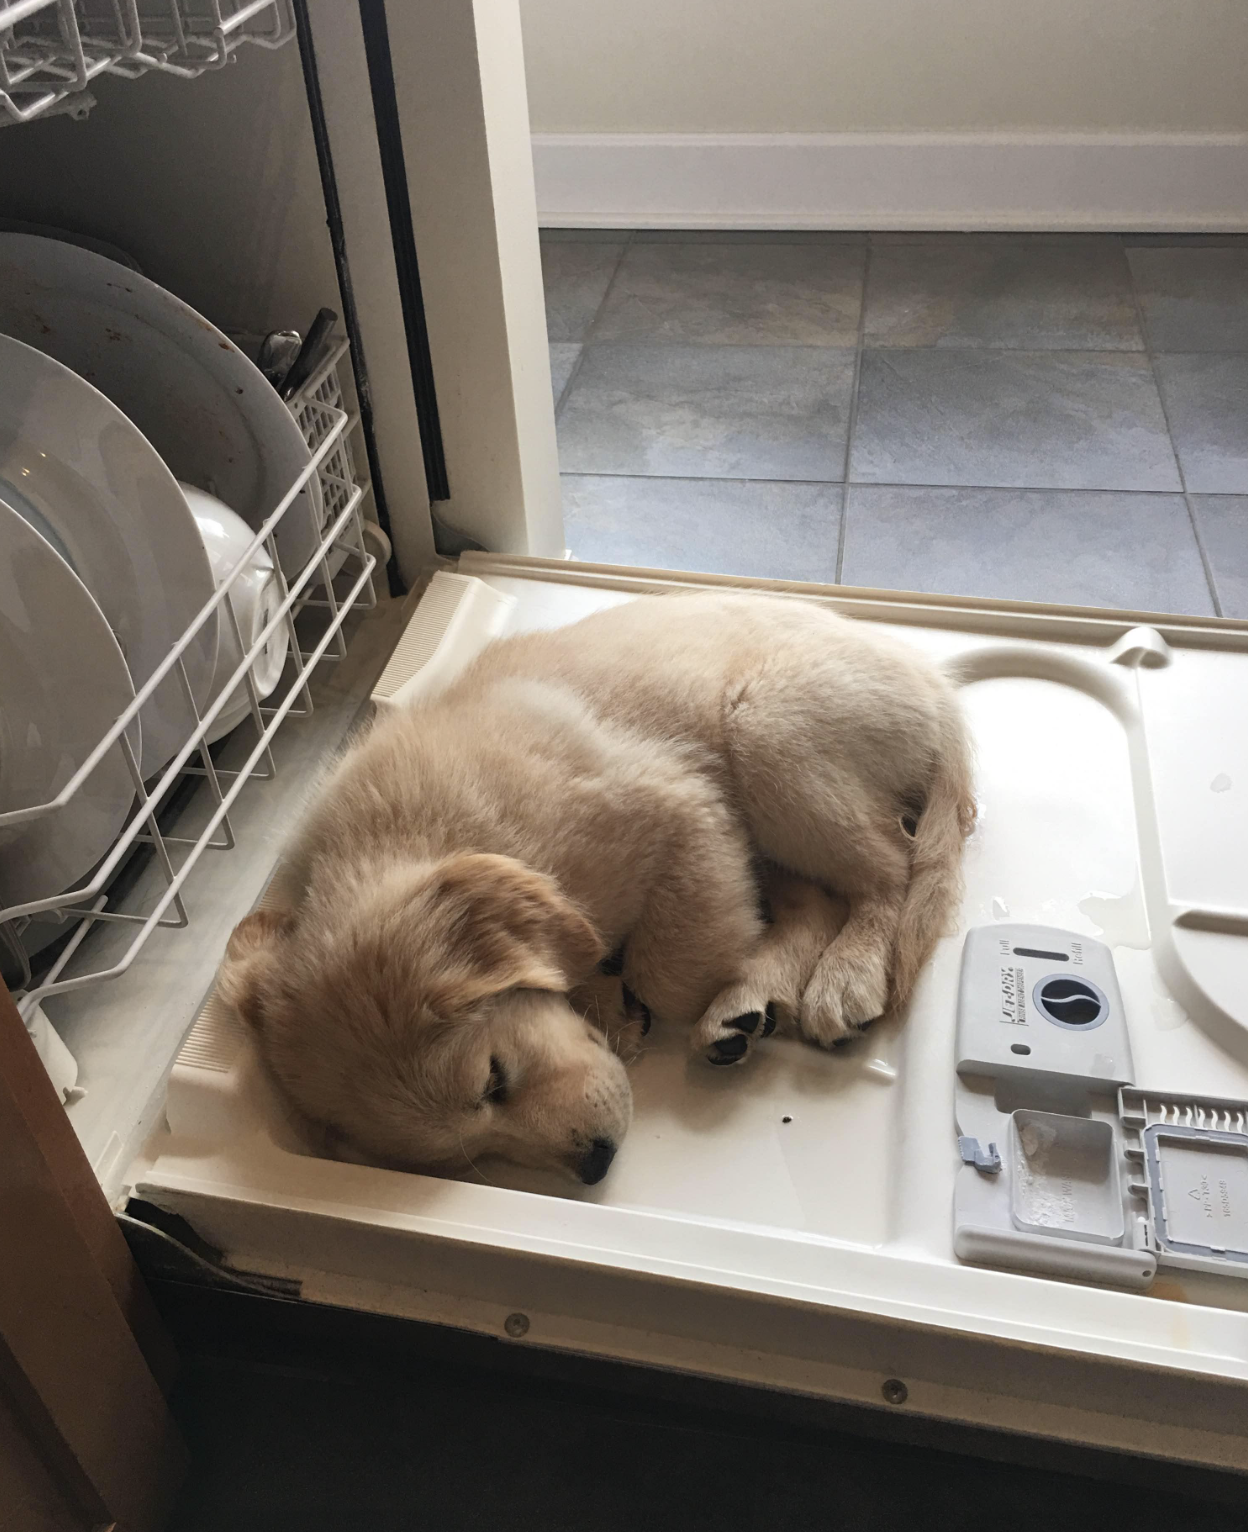 A dog sleeping on a dishwasher in a room we were asked to create for her pets 